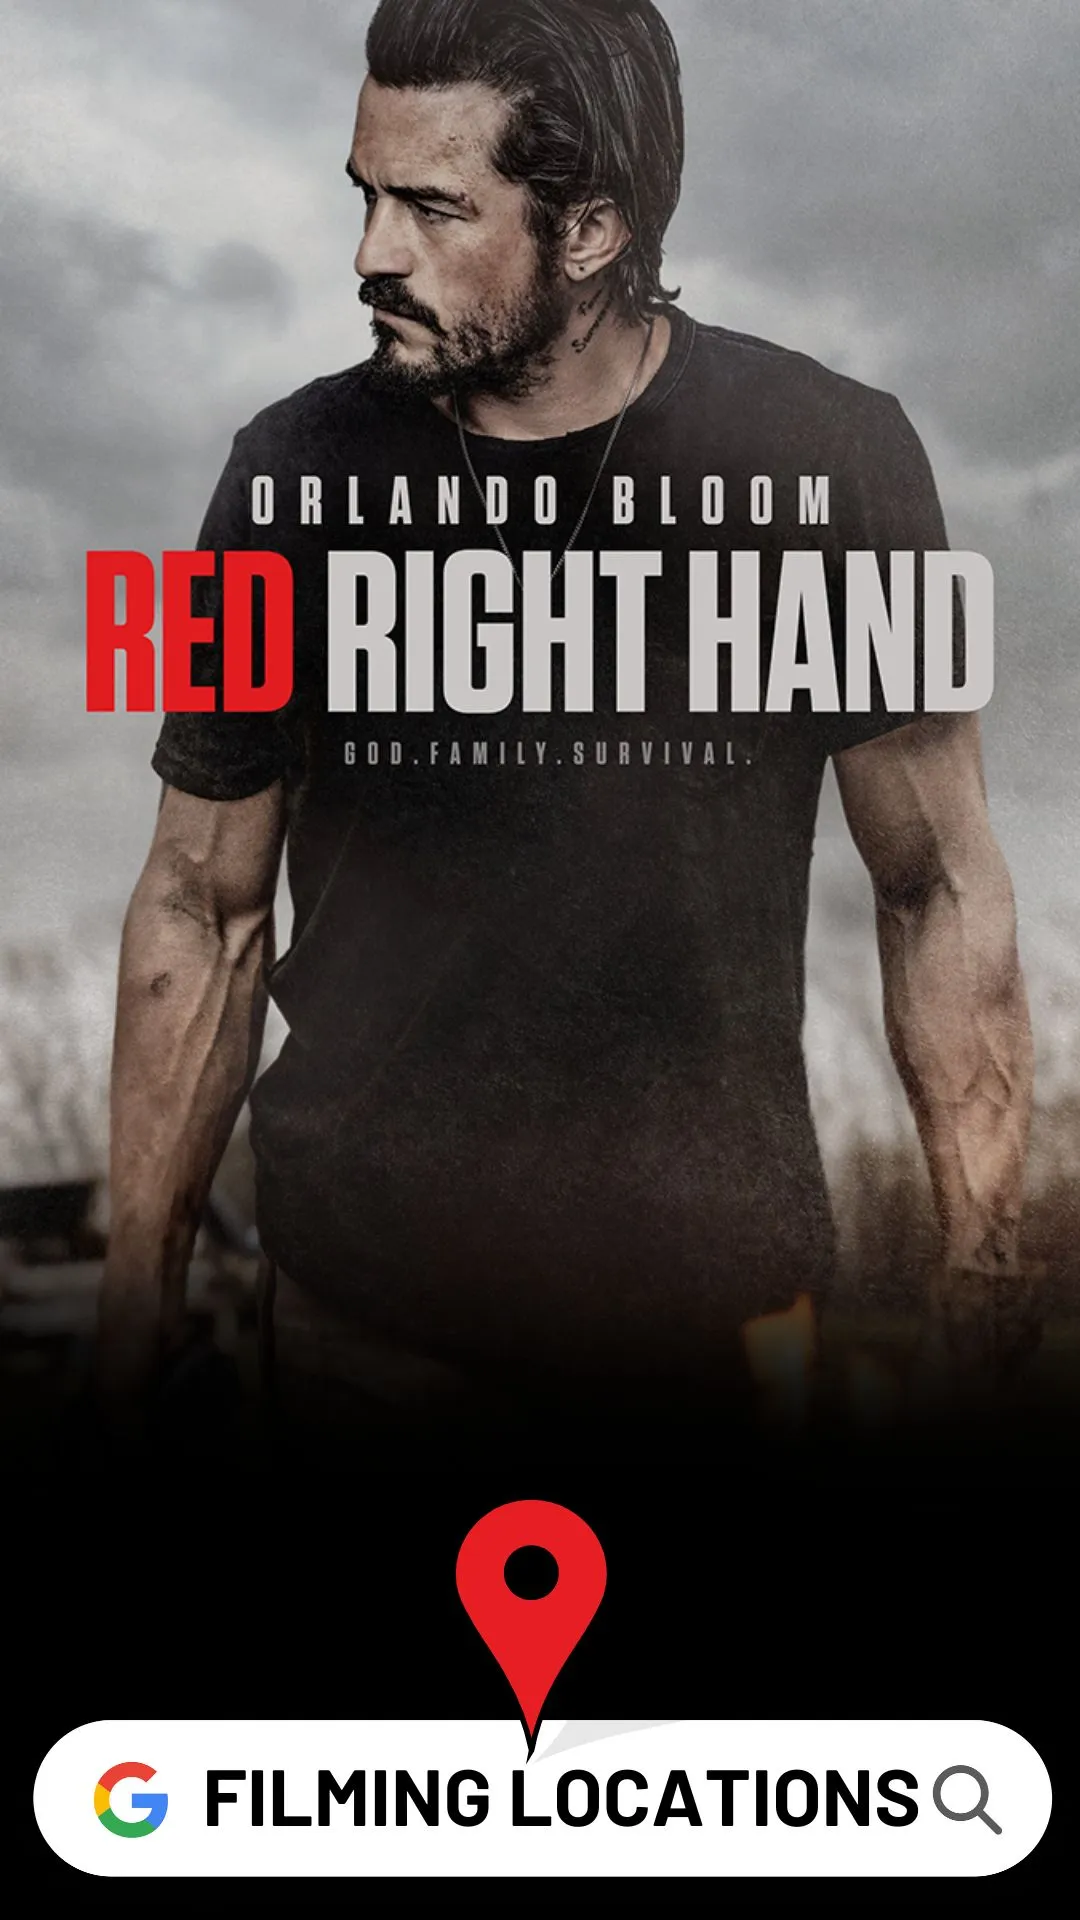 Red Right Hand Filming Locations